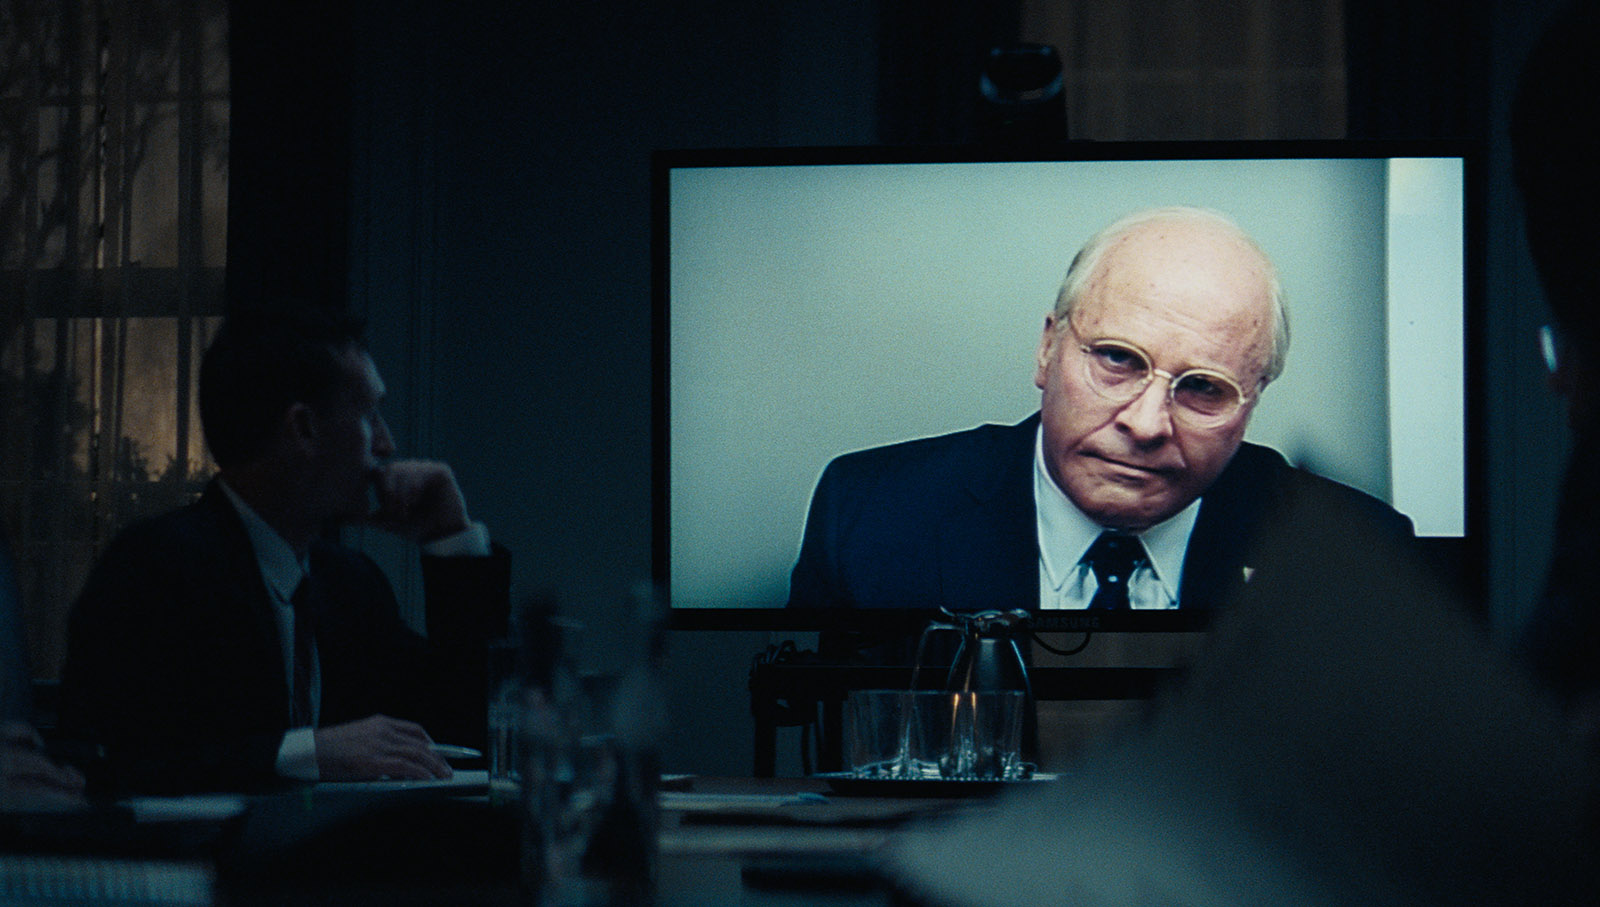 Christian Bale as Dick Cheney in Adam McKay’s Vice